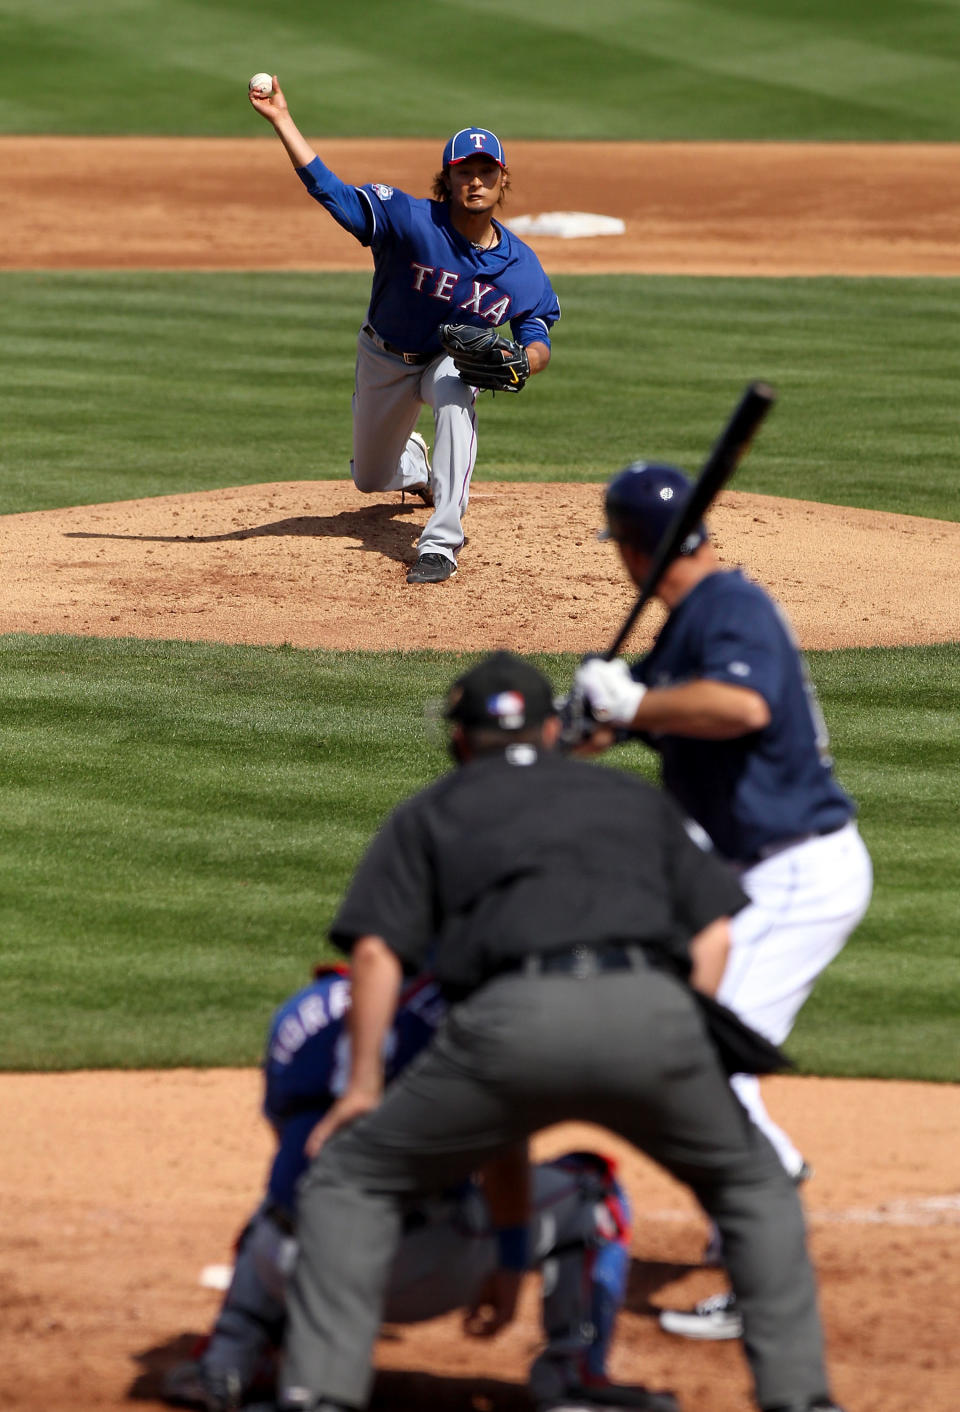 PEORIA, AZ - MARCH 07: Starting pitcher Yu Darvish #11 of the Texas Rangers pitches against the San Diego Padres during the spring training game at Peoria Stadium on March 7, 2012 in Peoria, Arizona. (Photo by Christian Petersen/Getty Images)